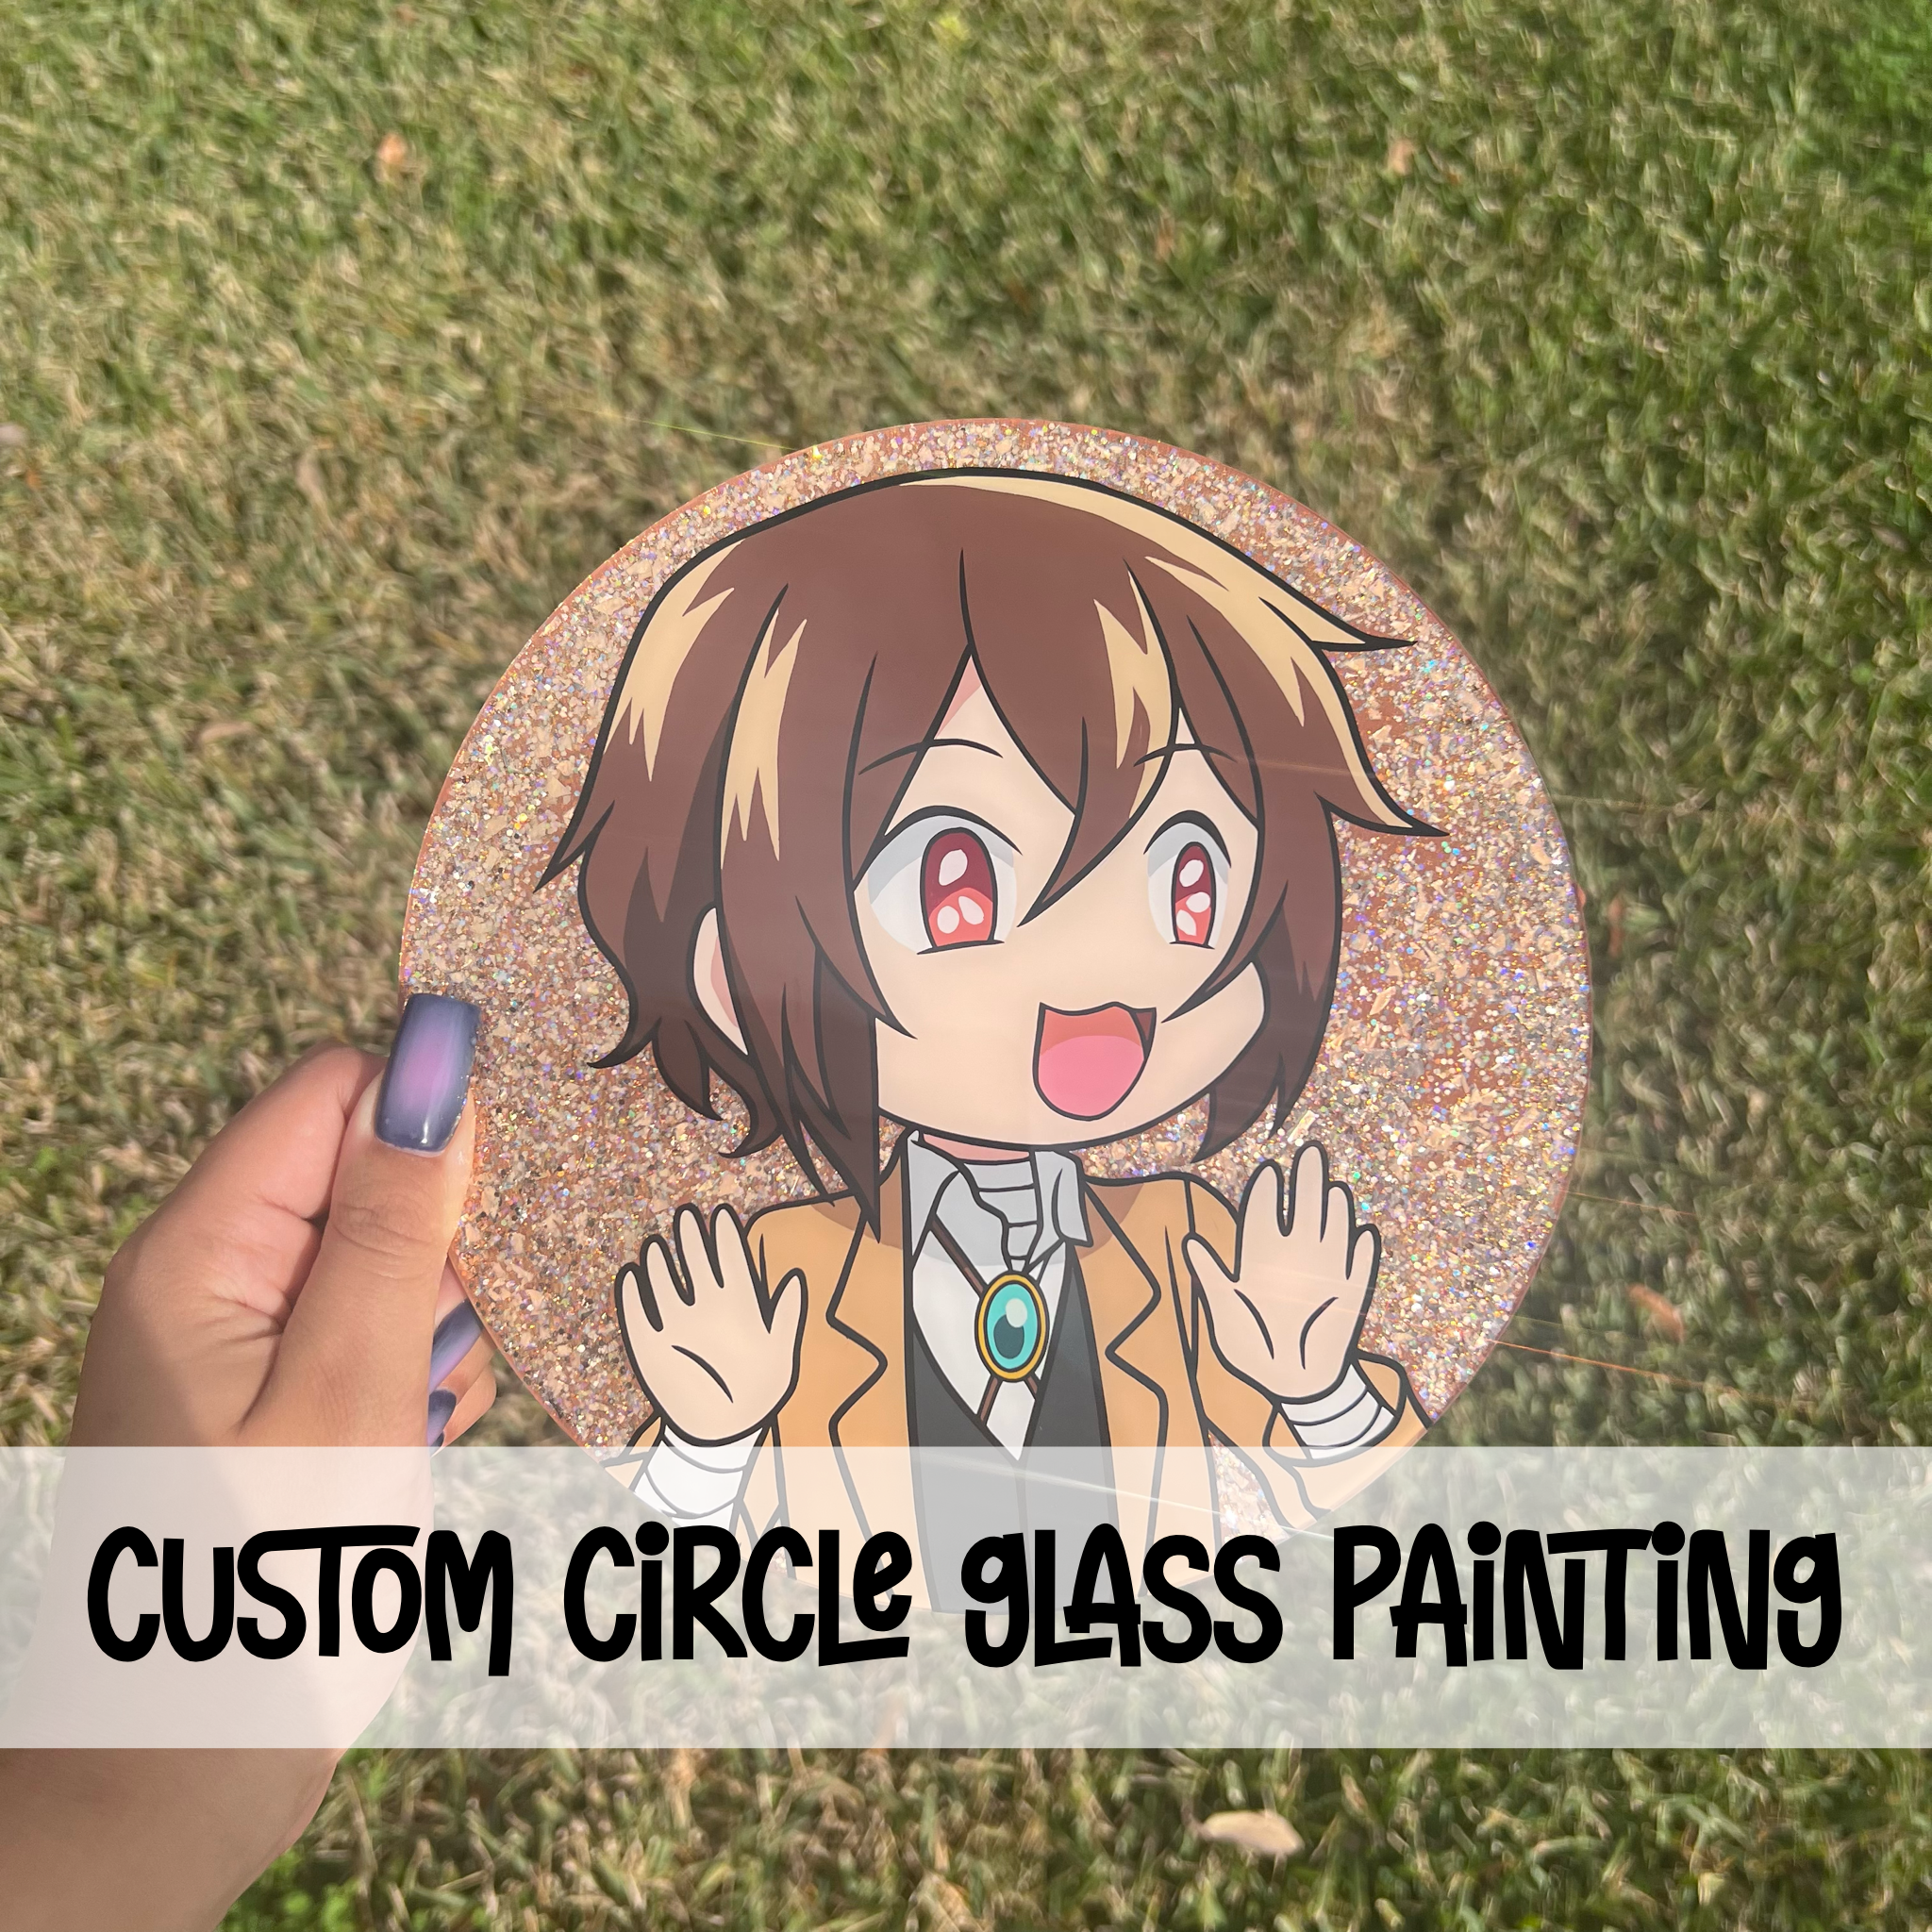 Hanako-kun Anime Glass Painting for Sale in Burbank, IL - OfferUp